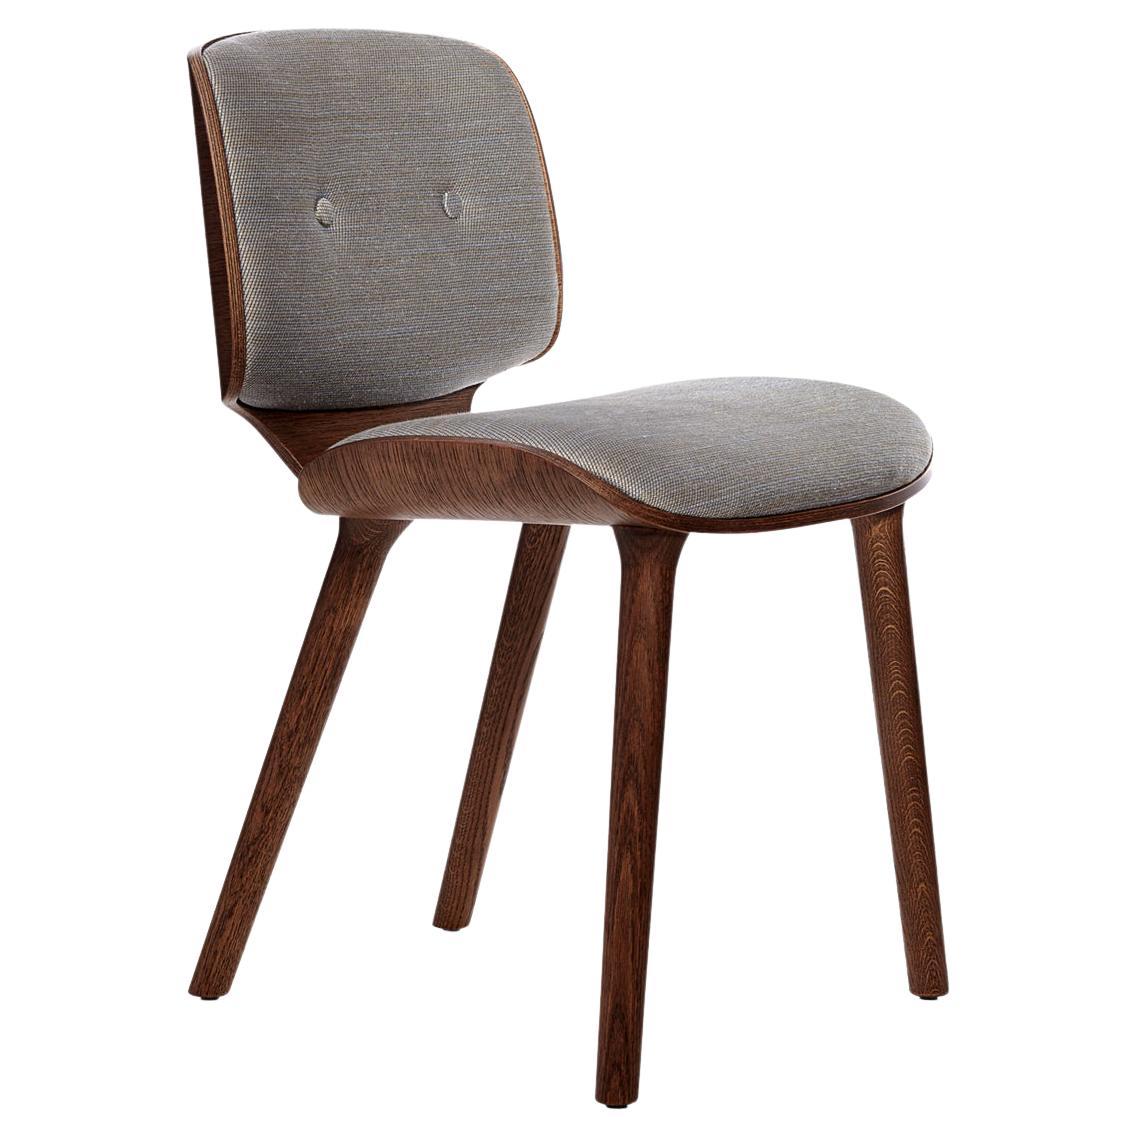 Moooi Nut Dining Chair in Cinnamon Stained Oak & Oray Ronan, Mineral Upholstery For Sale